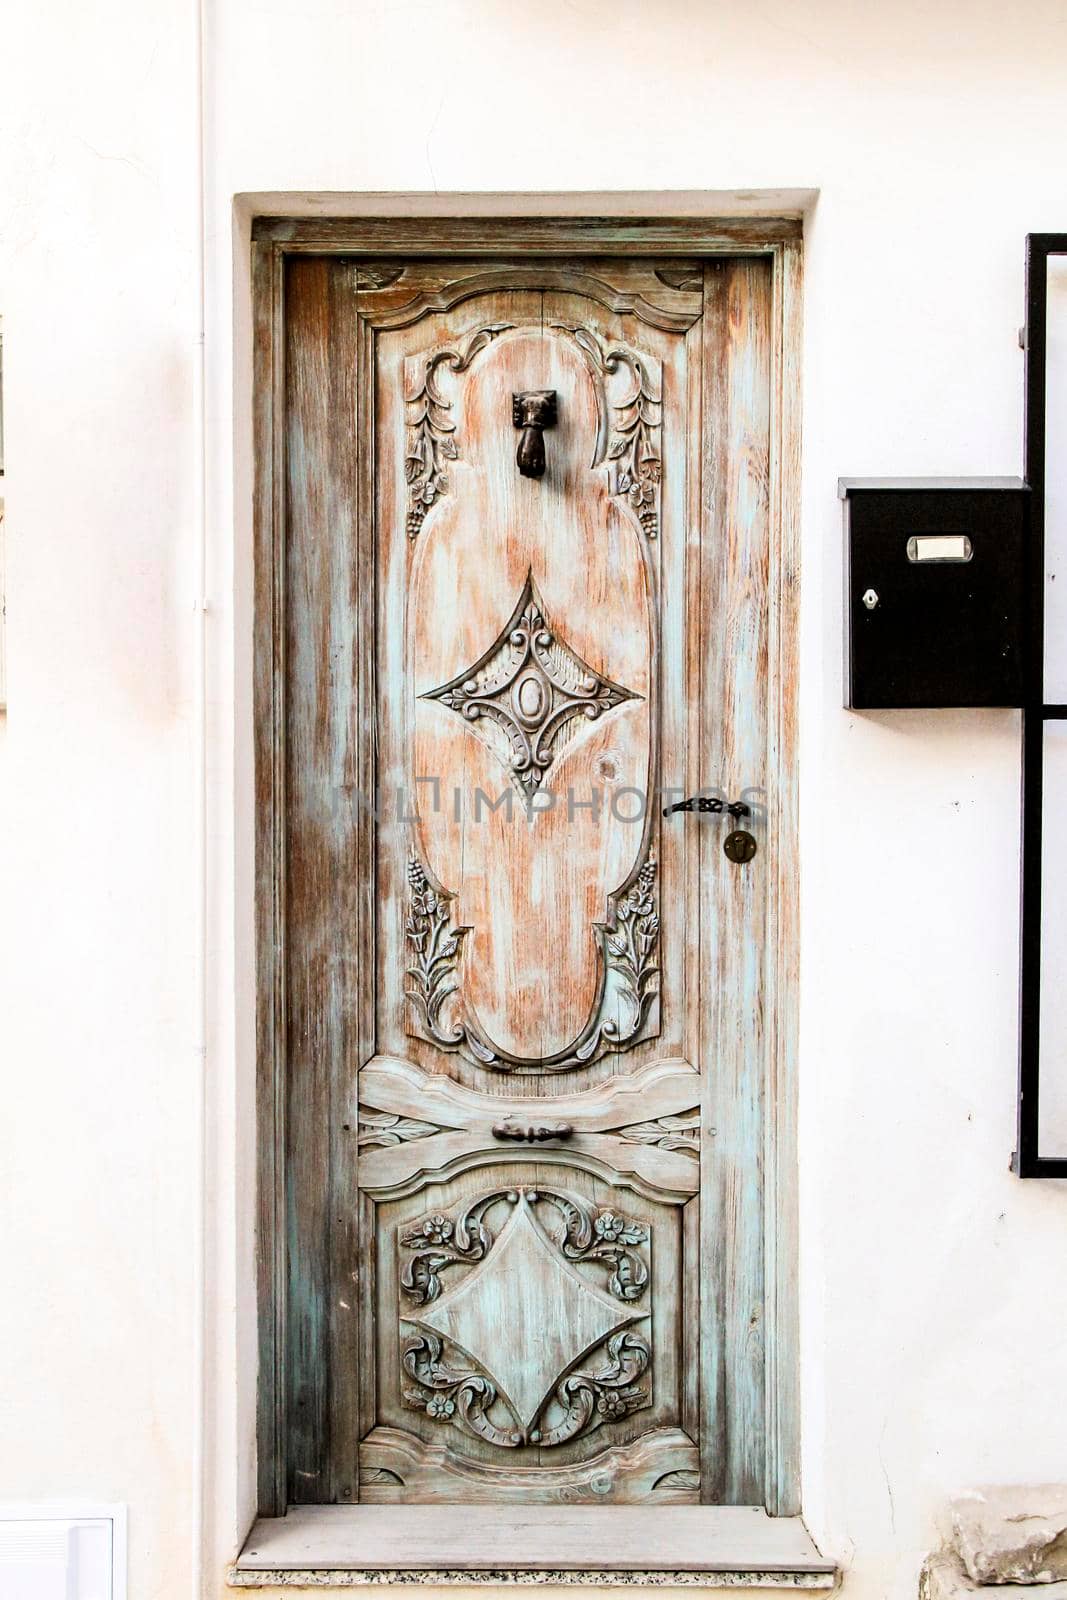 Blue wooden door with black metal knocker and whitewashed facade in Altea, Alicante, Spain.